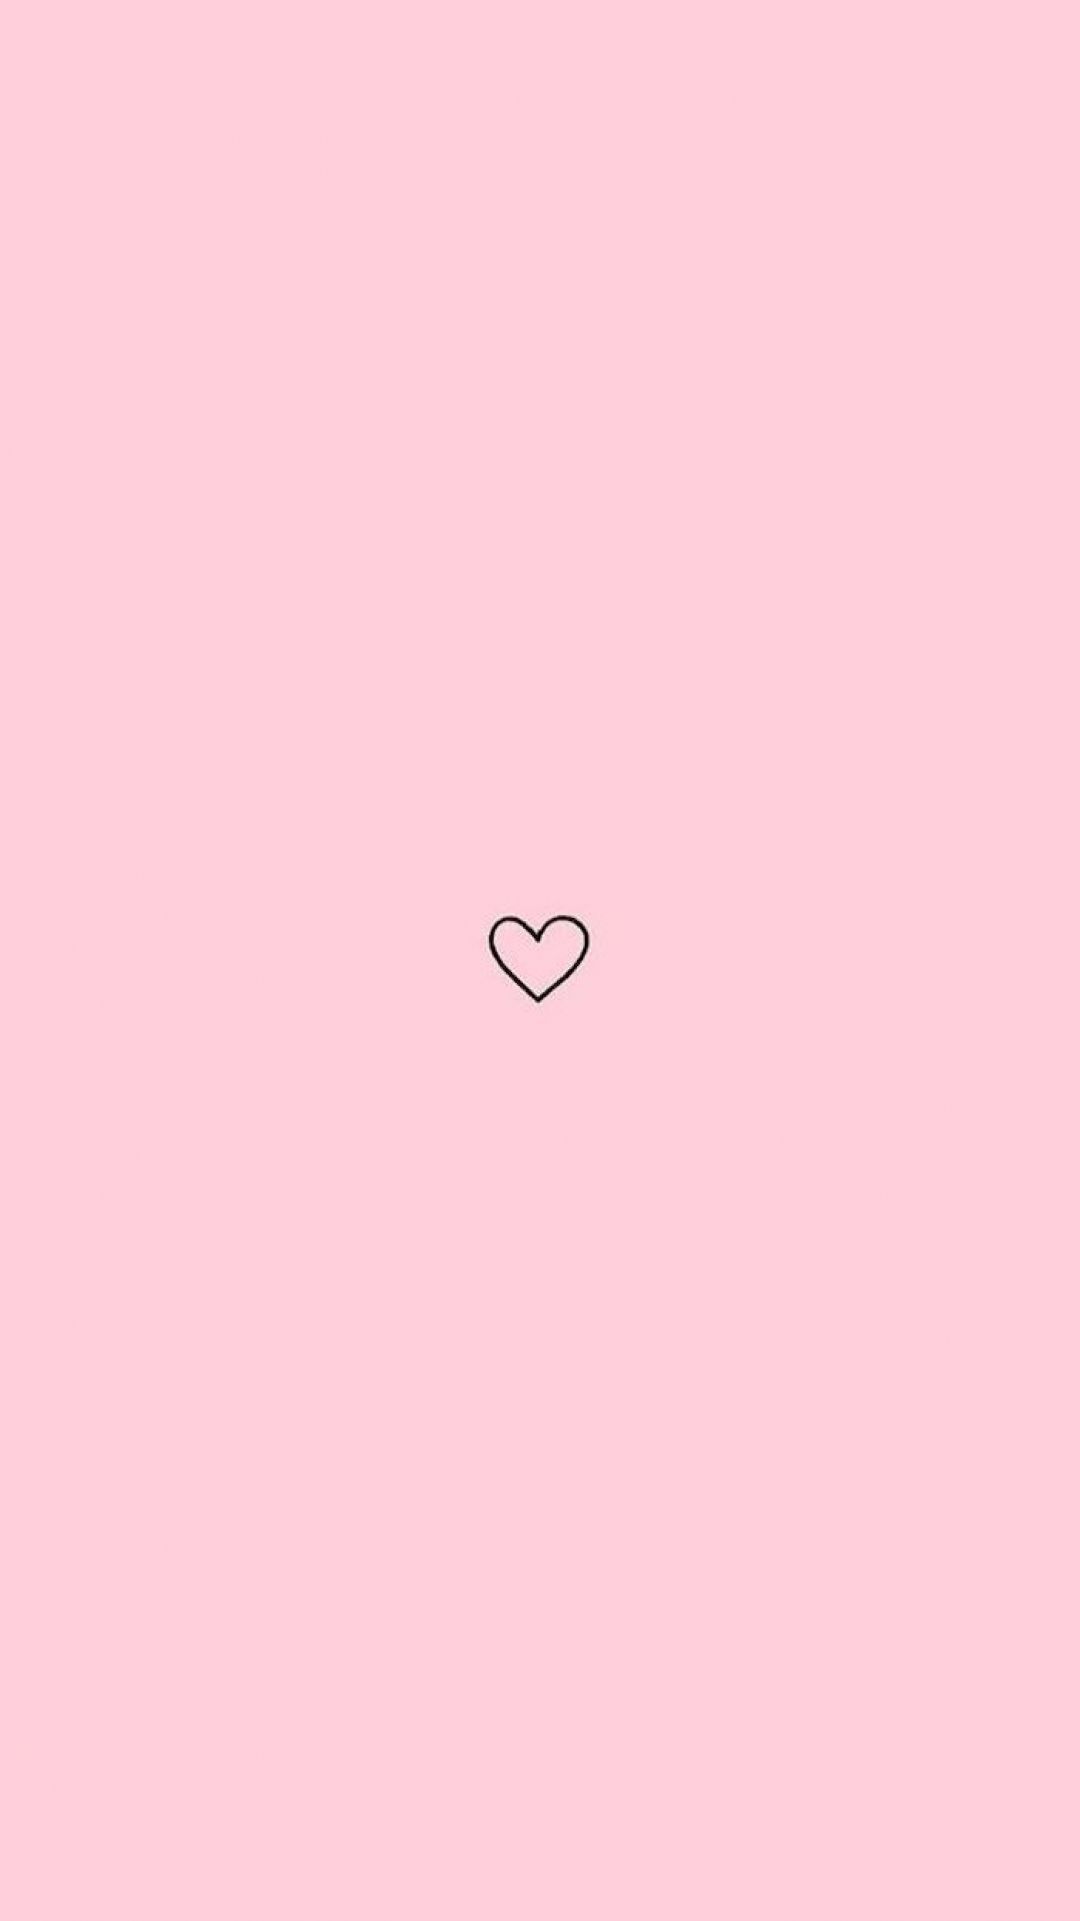 A heart shaped outline on pink background - Android